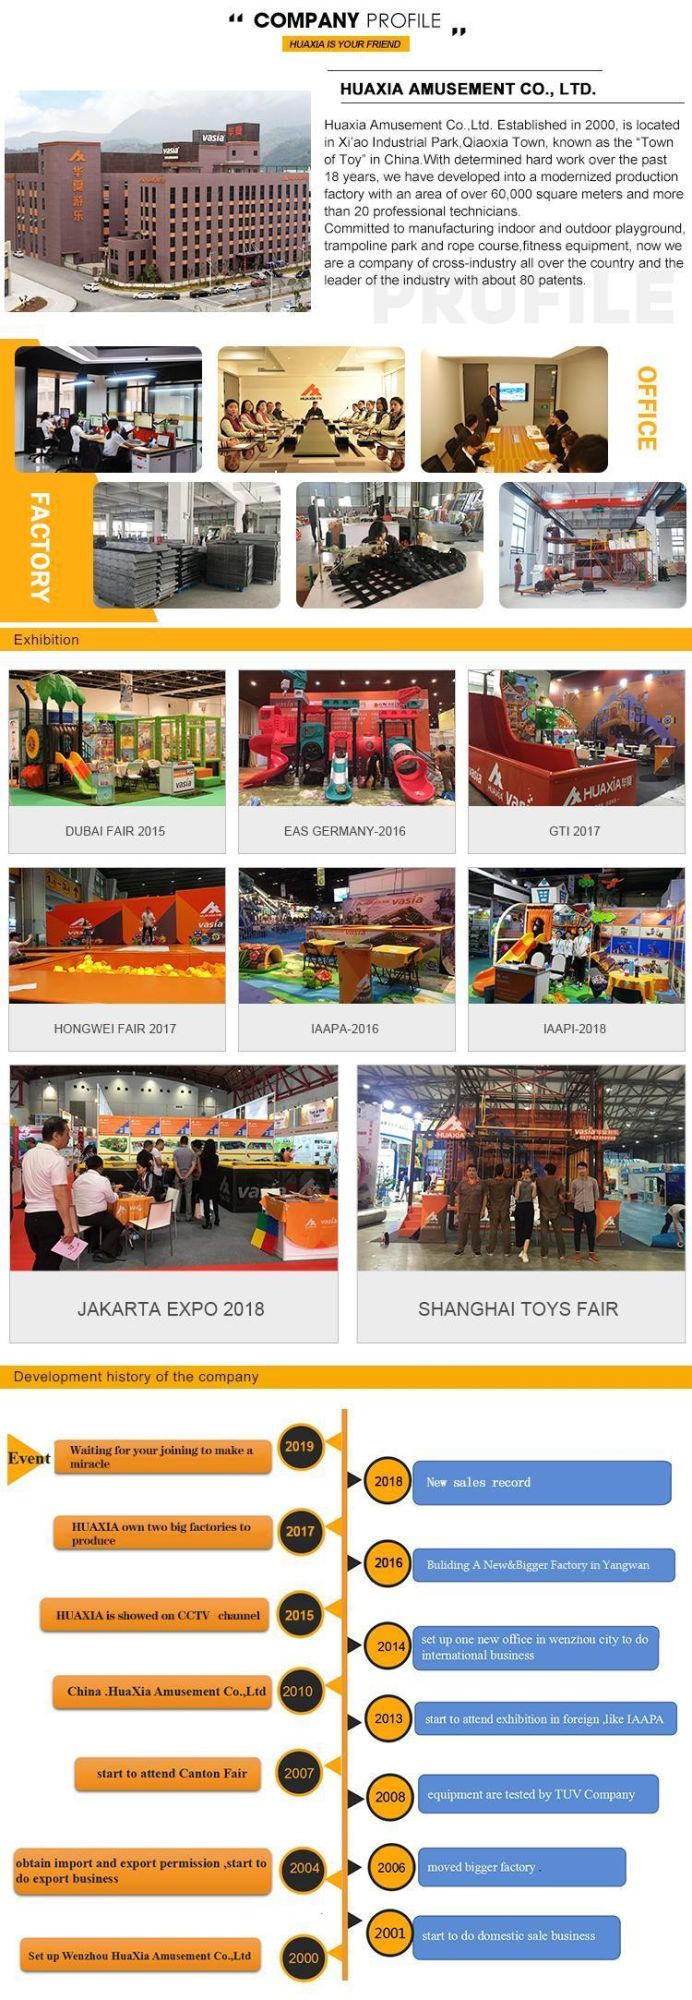 2020 Best Sale Customized Jungle Gym Playground Equipment Indoor for Adult